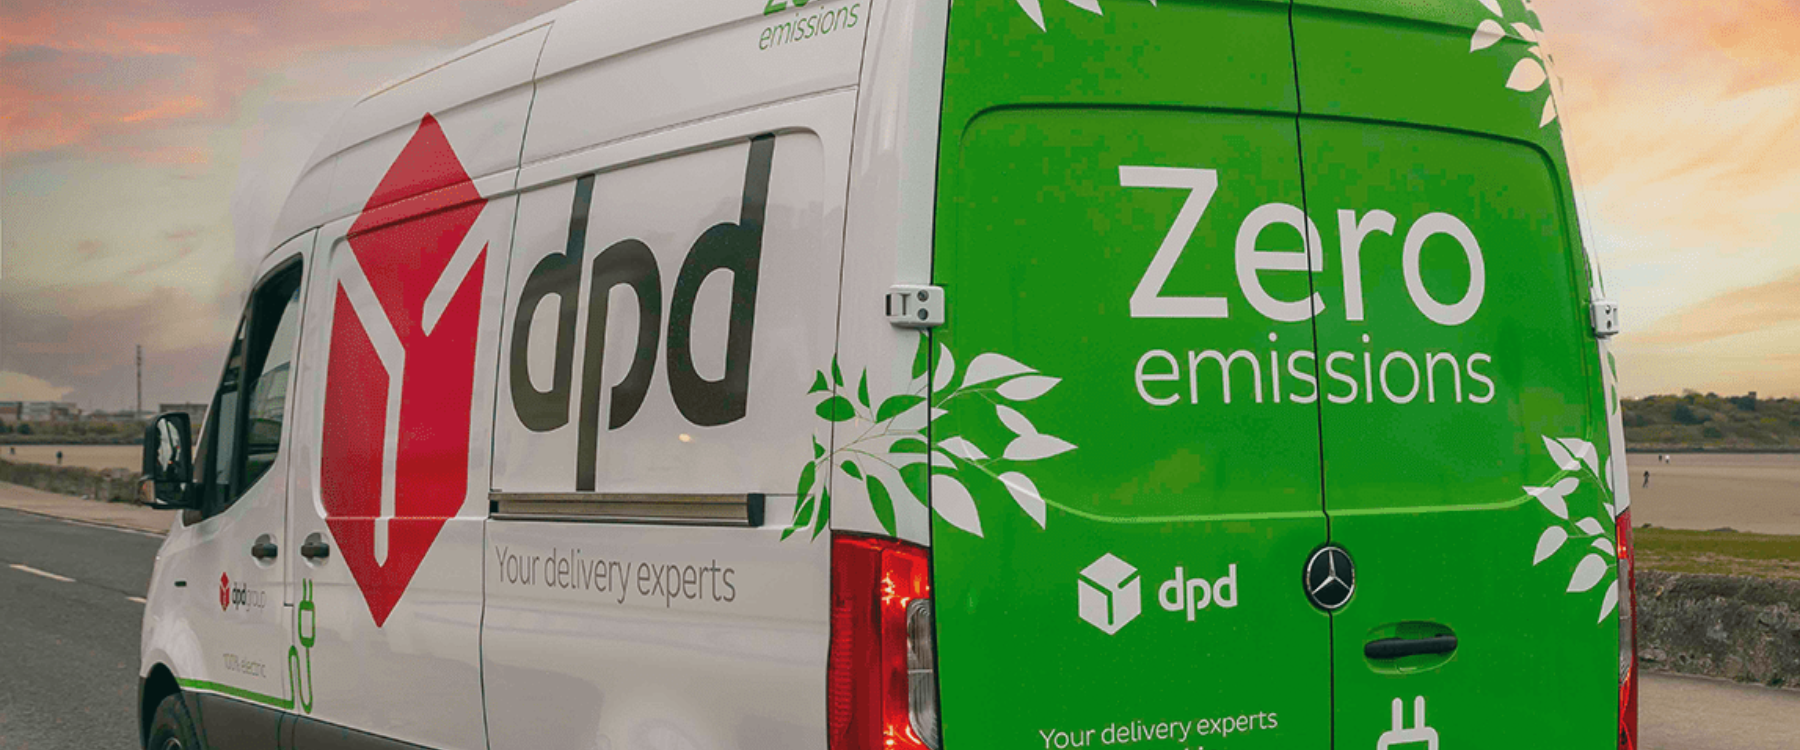 DPD Electric Delivery vans help protect the environment by reducing emissions